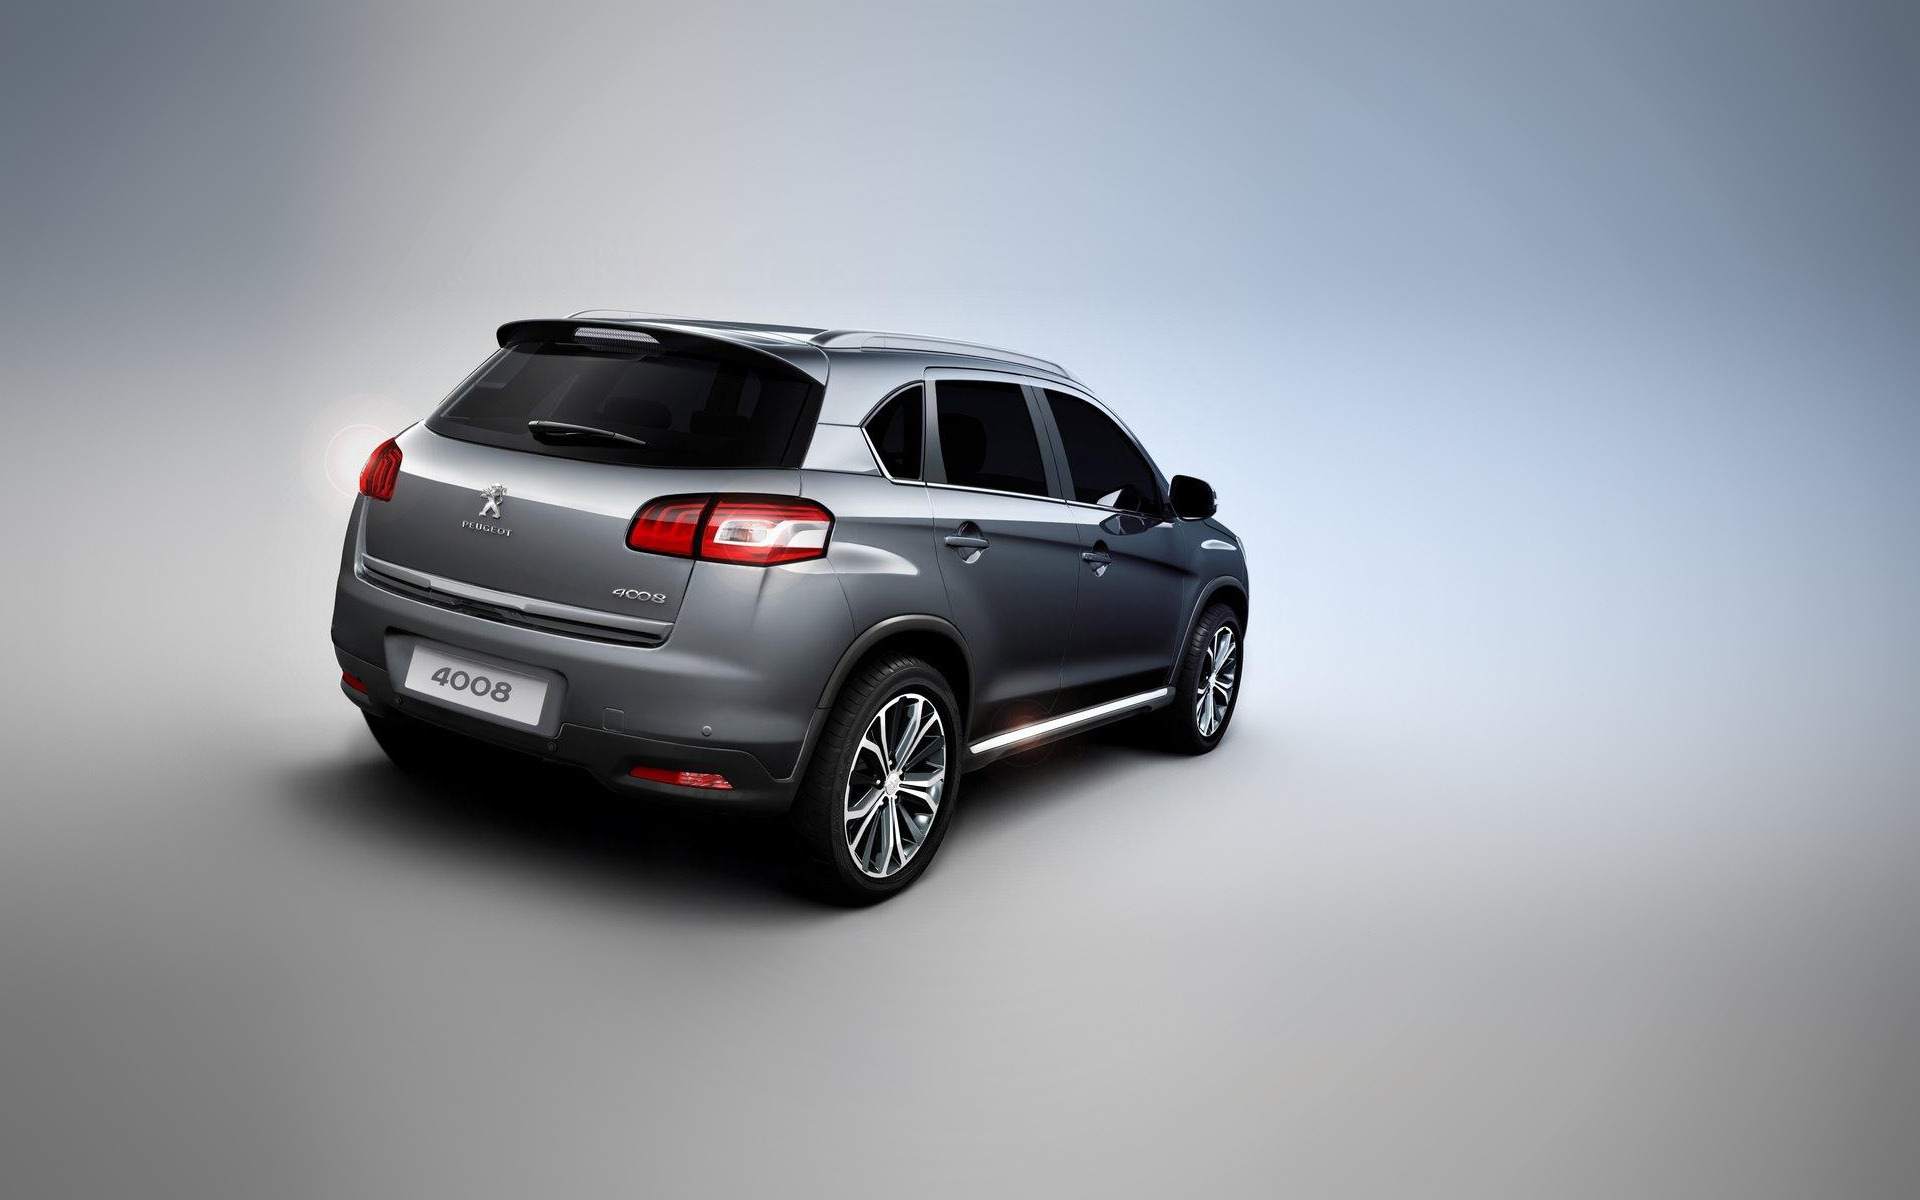 2012 Peugeot 4008 Rear for 1920 x 1200 widescreen resolution